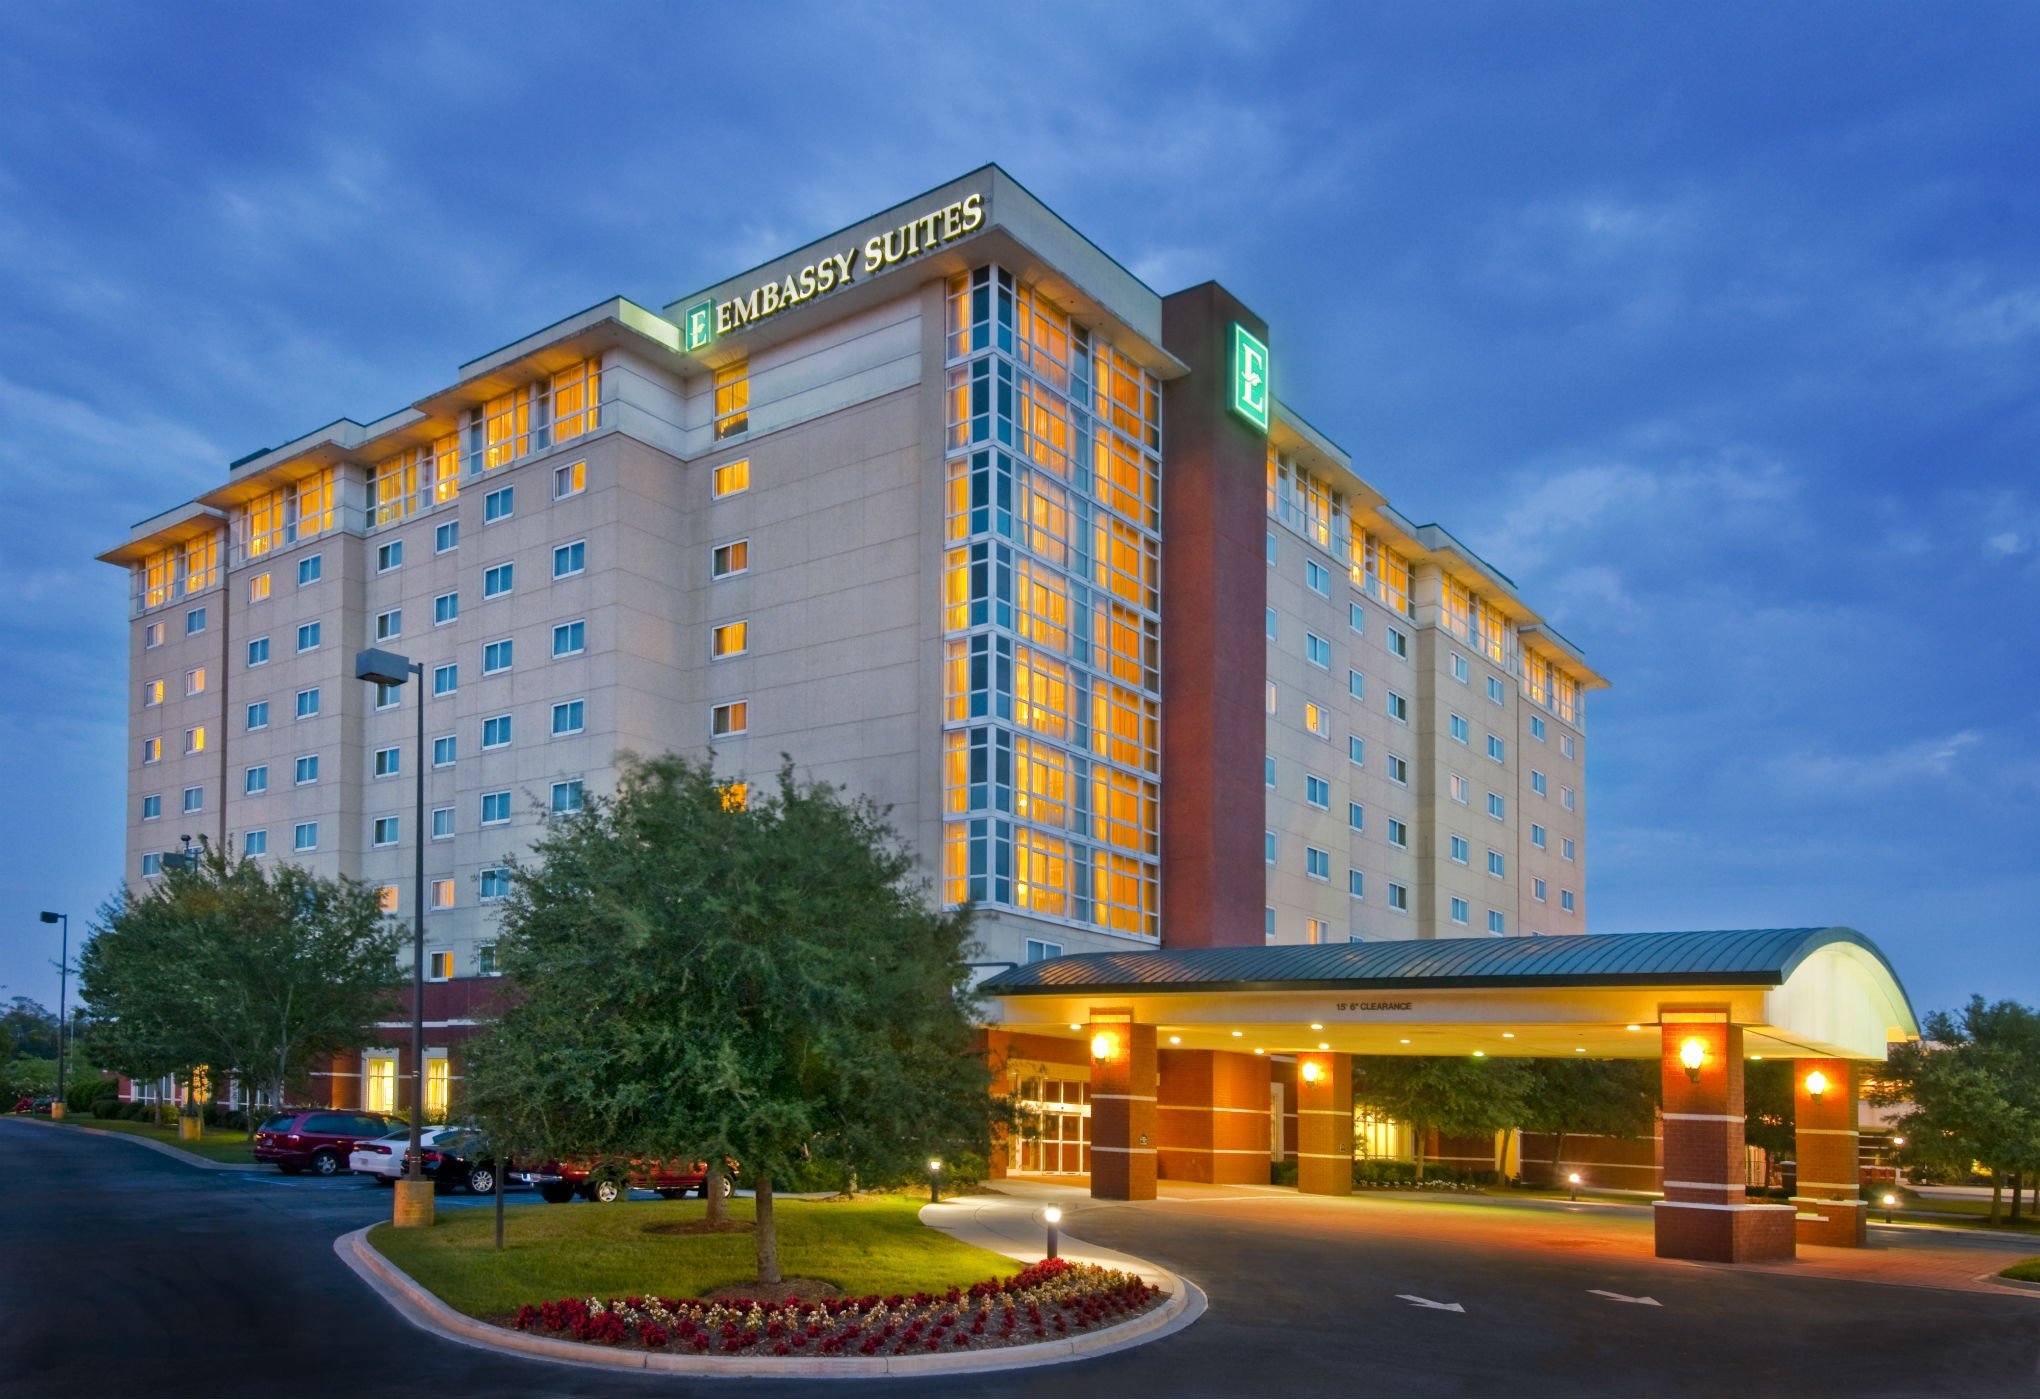 Photo of Embassy Suites by Hilton Charleston Airport Hotel & Convention Center, North Charleston, SC